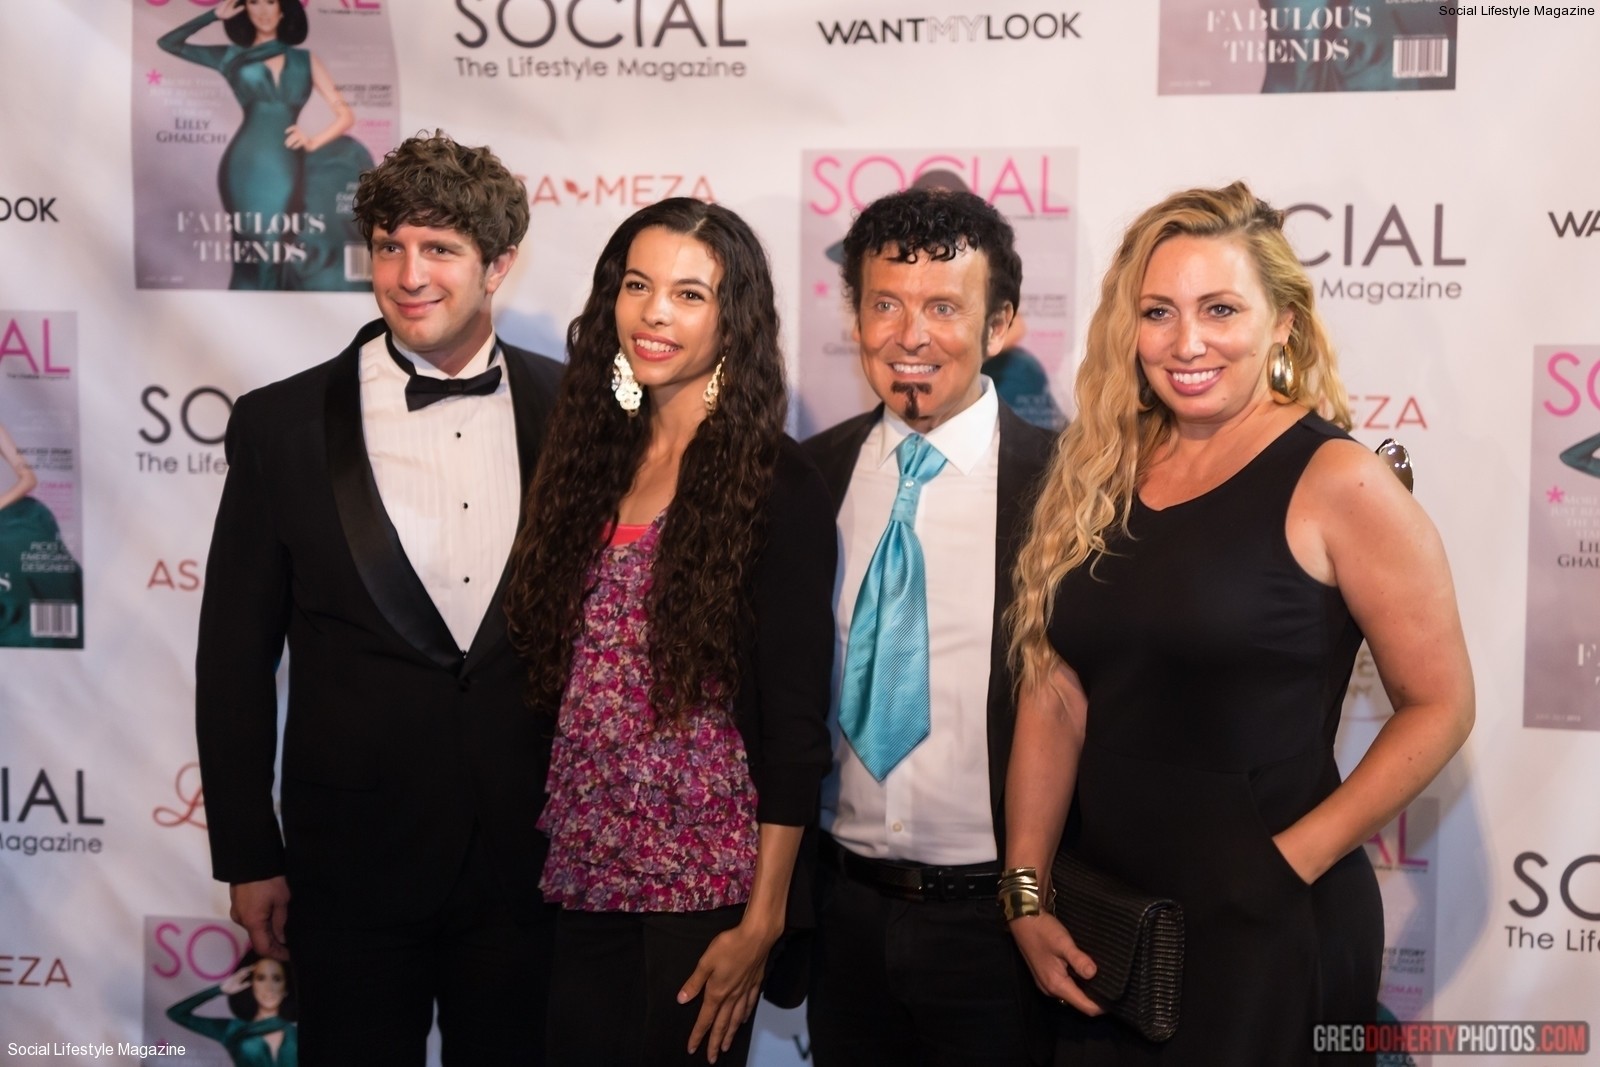 Socal-lifestyle-Magazine-launch-party-1273-X3-1